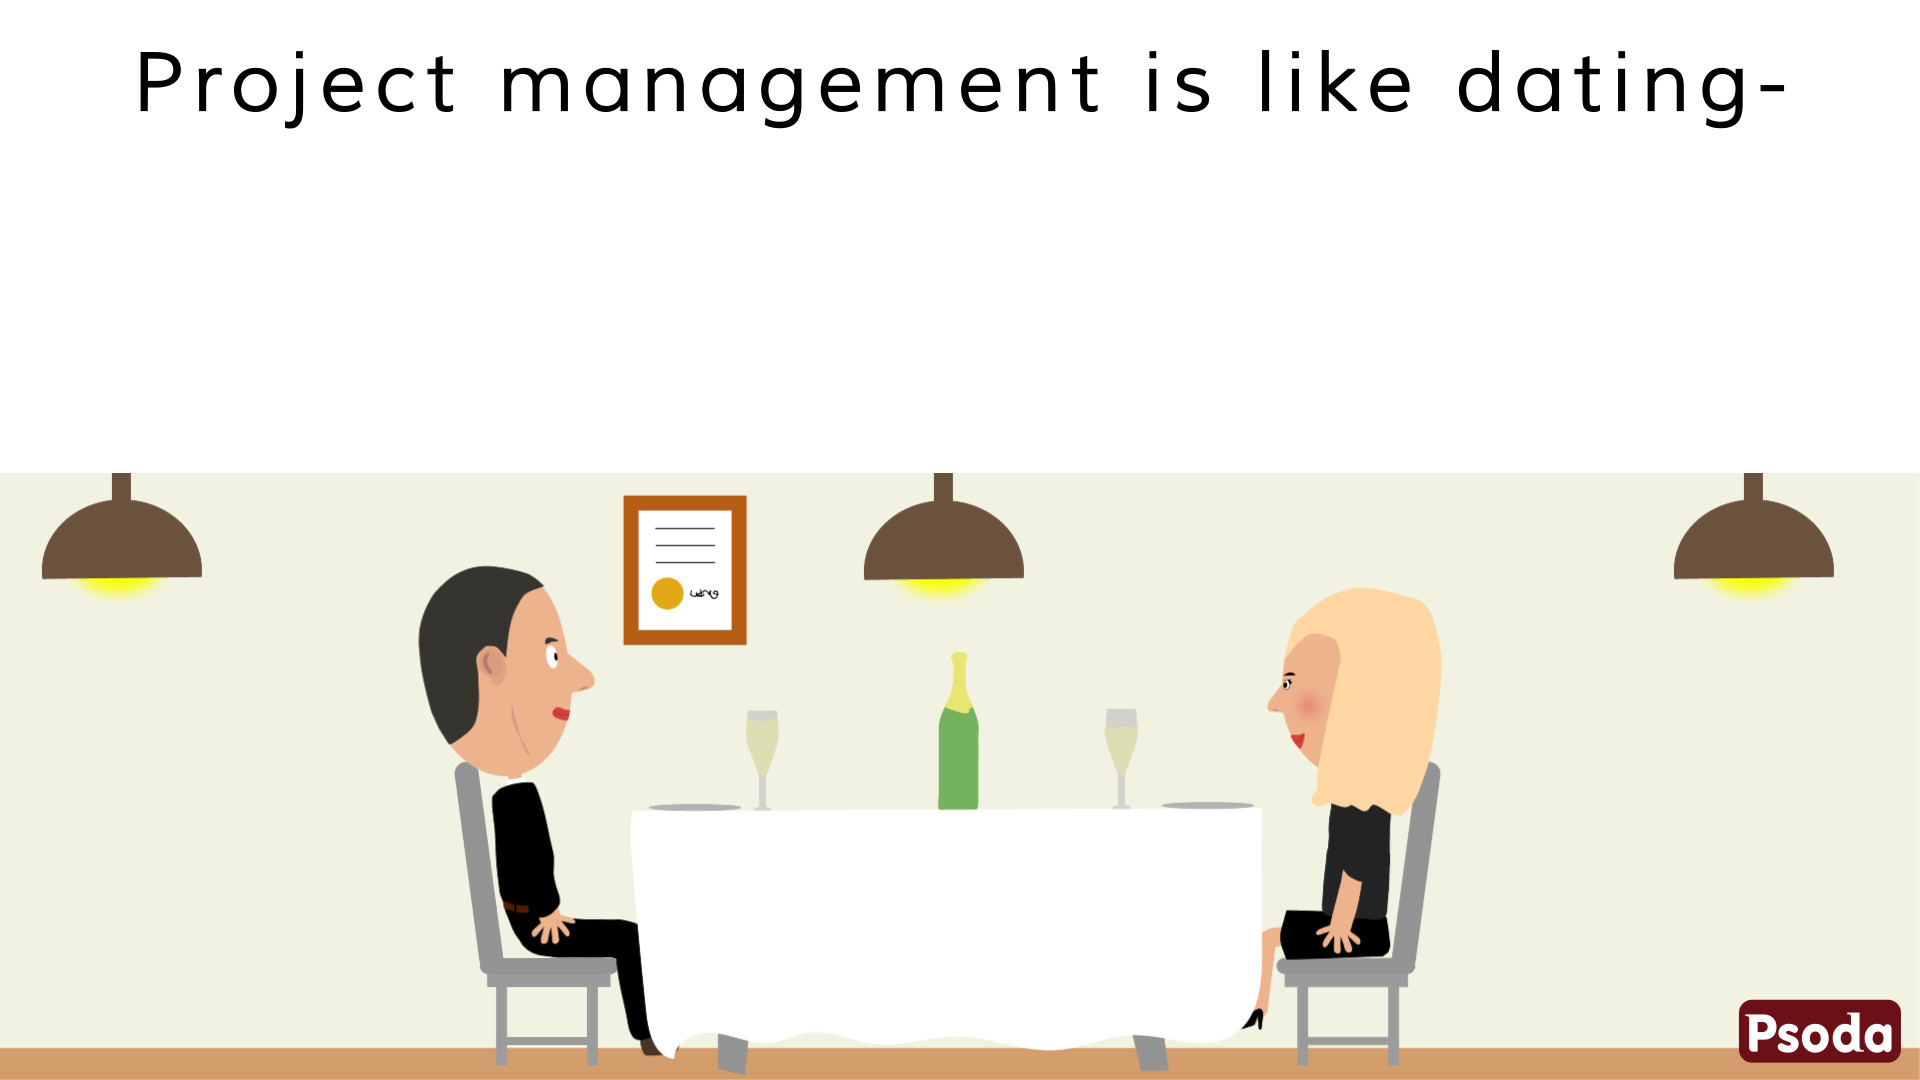 Funny Manager Quotes
 Funny but true project management quotes